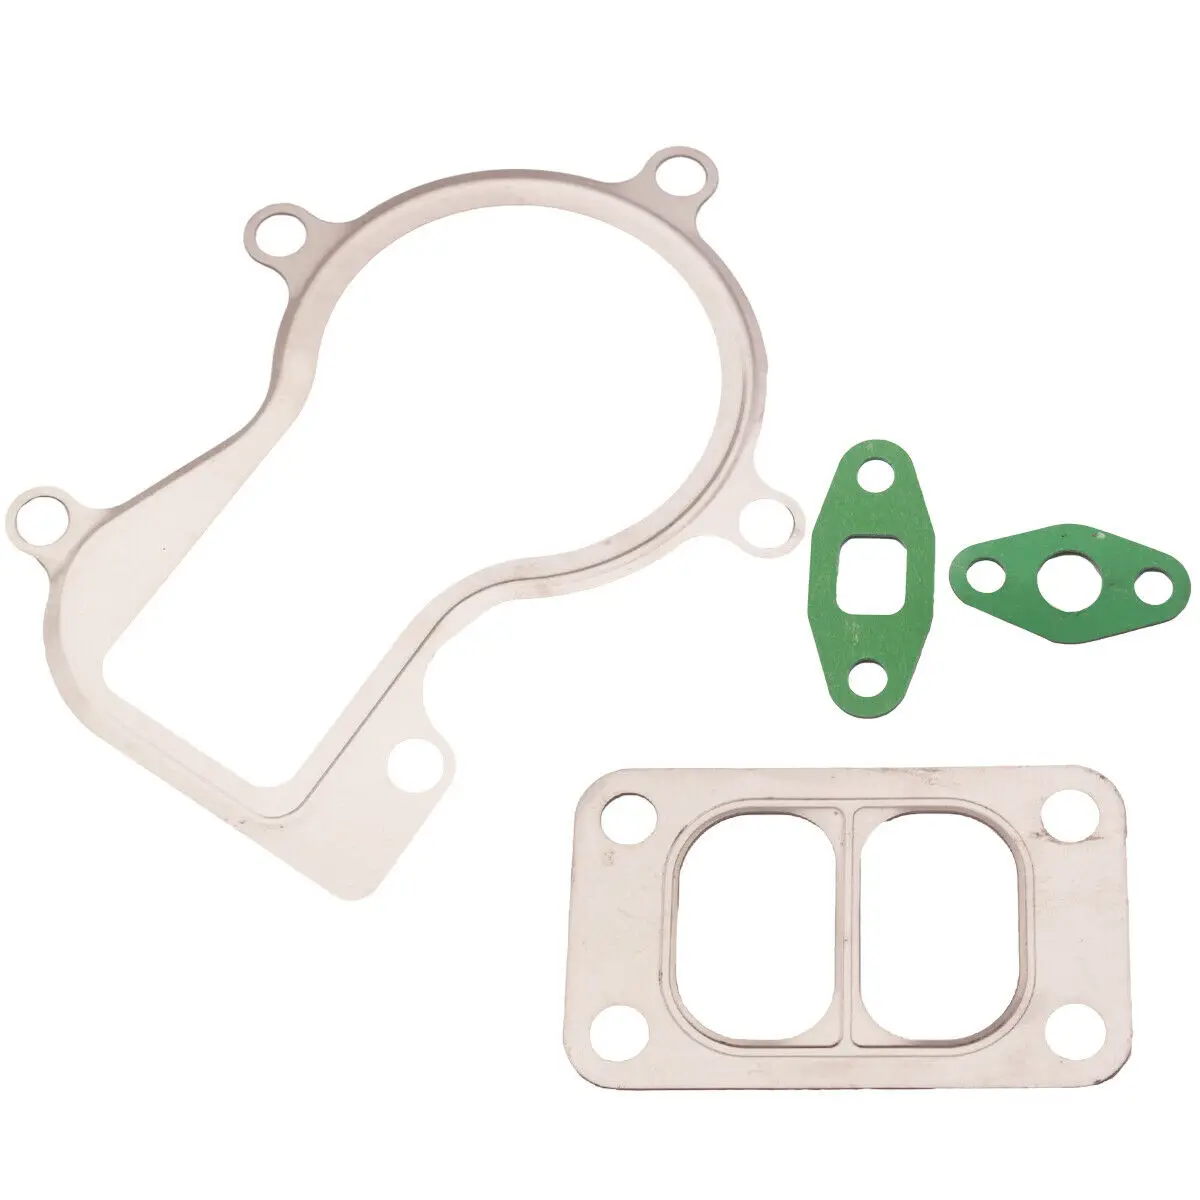 Stainless Steel Turbo Gasket Kit Fits for Holset HX35 HX35W Oil Inlet Outlet Turbocharger Gasket 